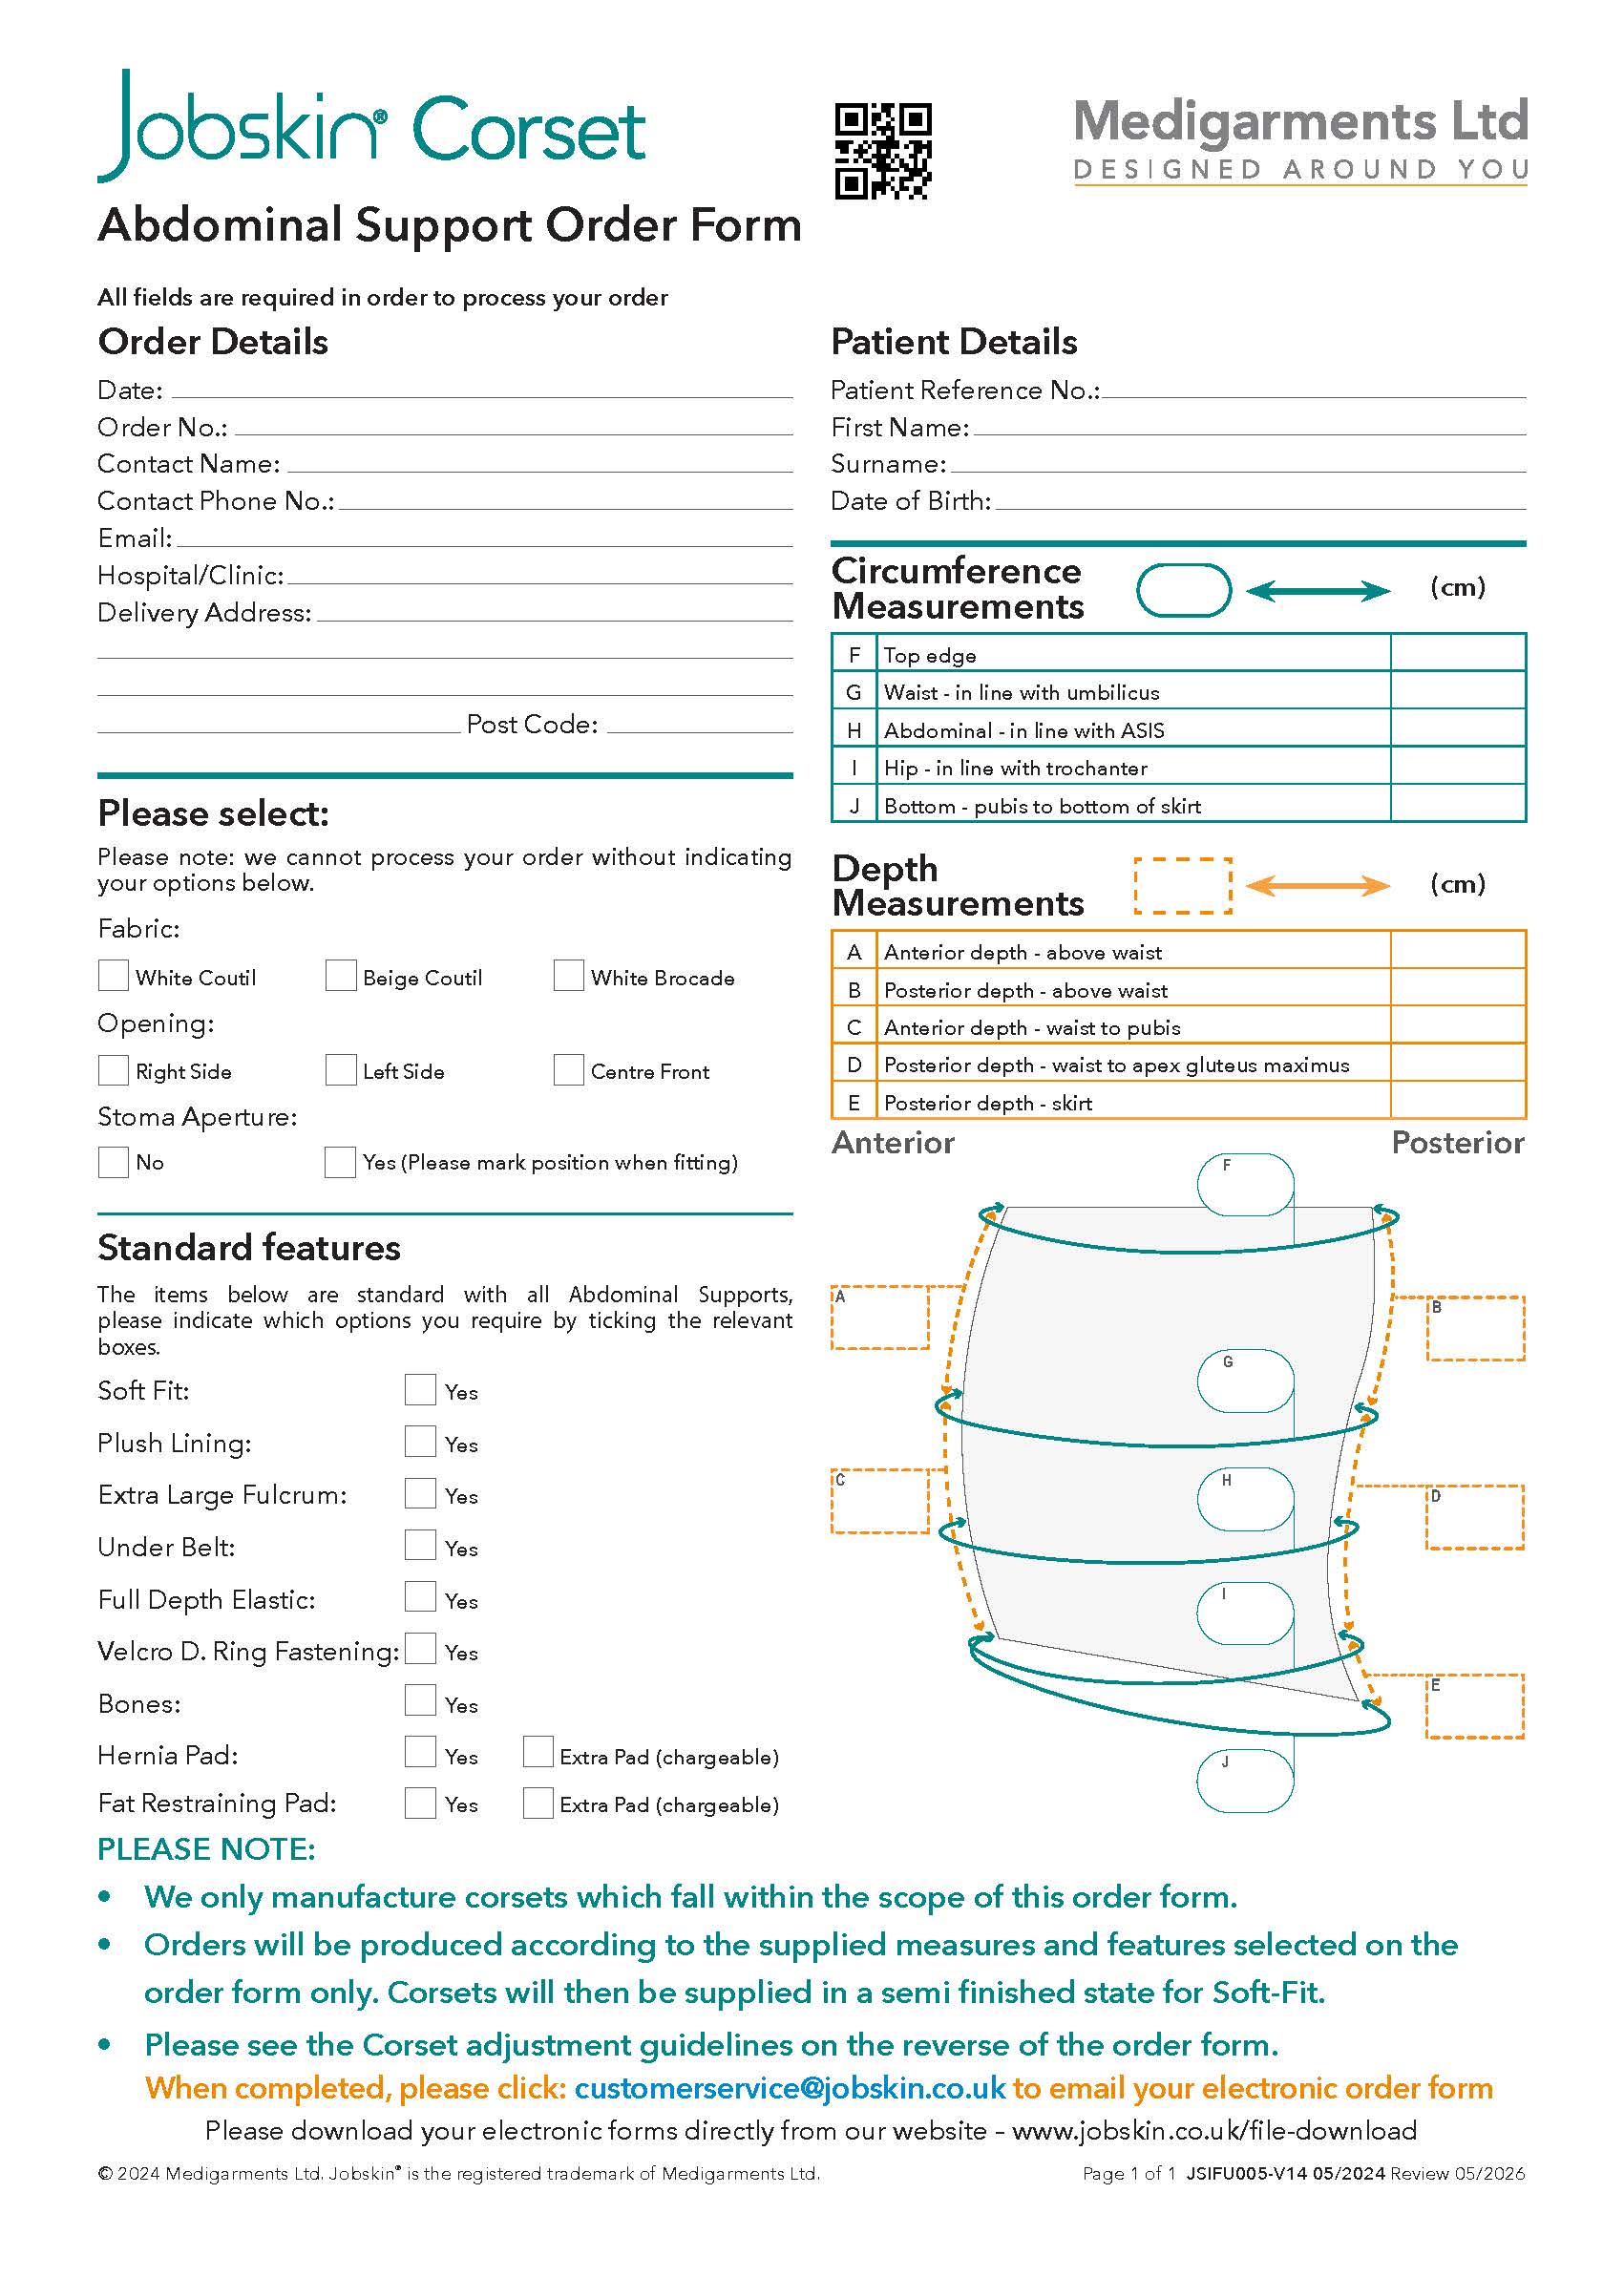 Jobskin Abdominal Support Order Form - Electronic